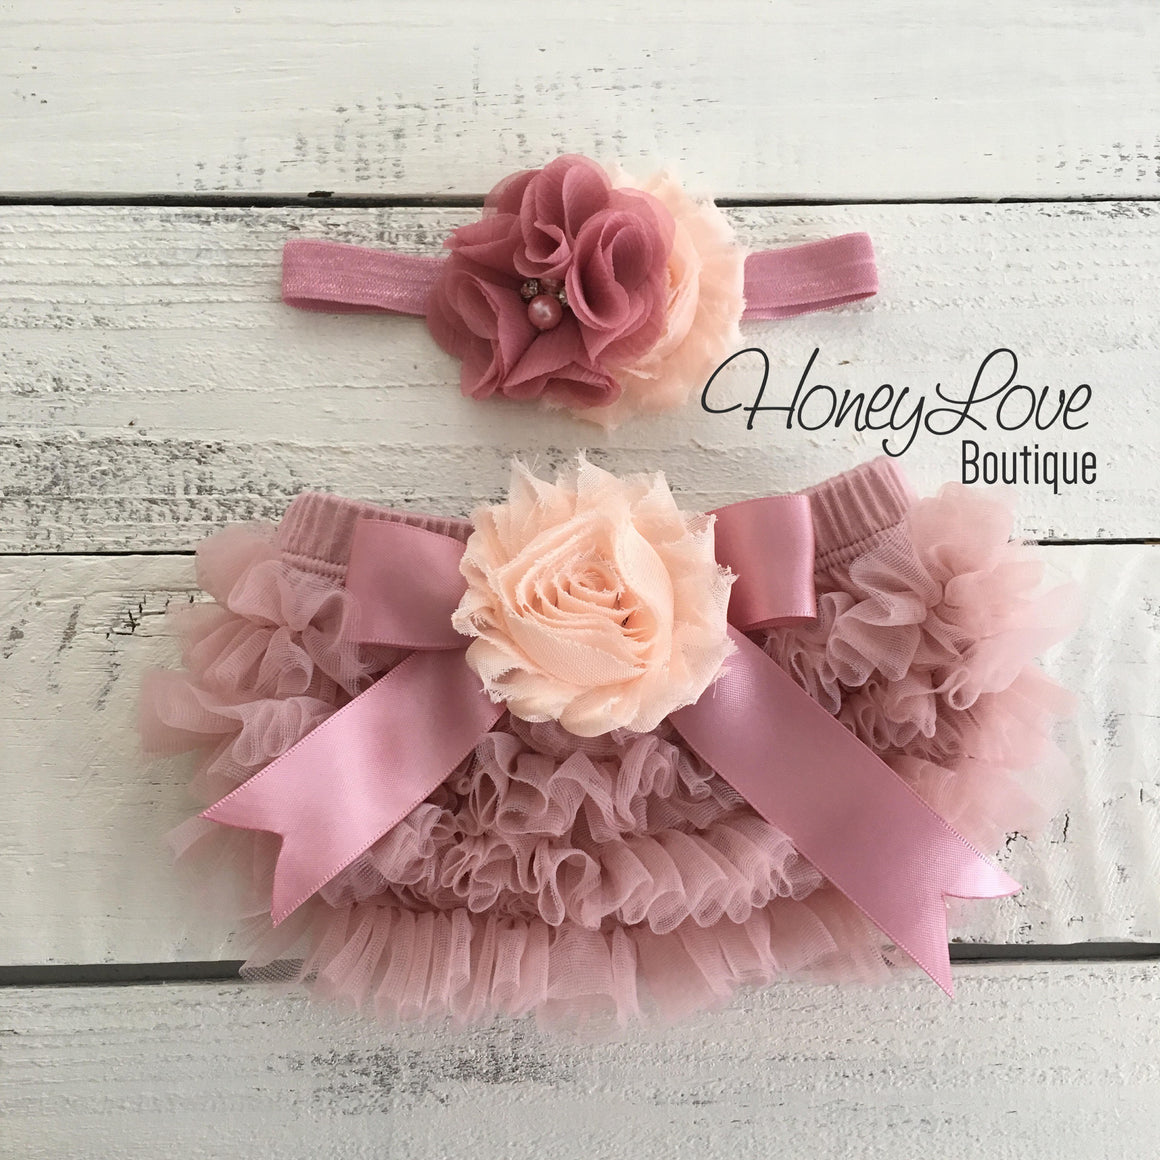 TWIN GIRLS! Peach and Vintage Pink ruffle bottom bloomers and matching headbands - embellished bloomers - HoneyLoveBoutique